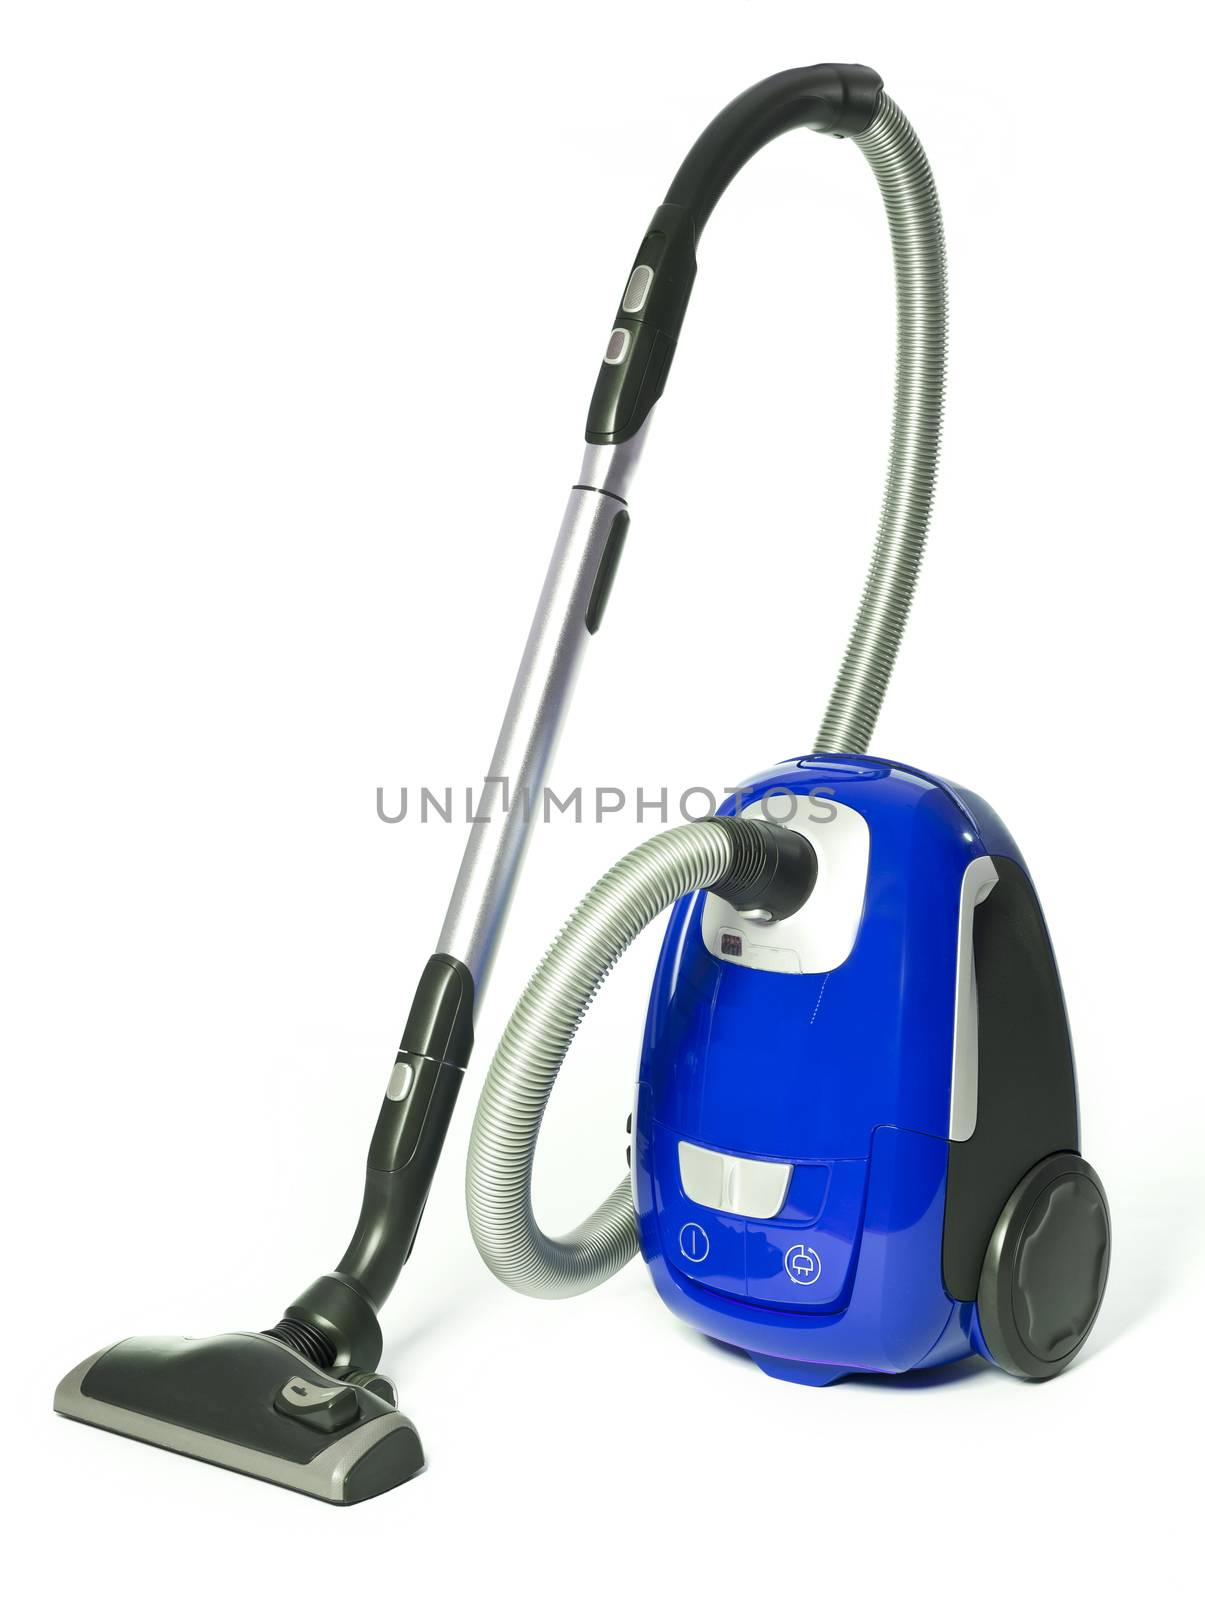 Blue Vacuum Cleaner isolated on white background